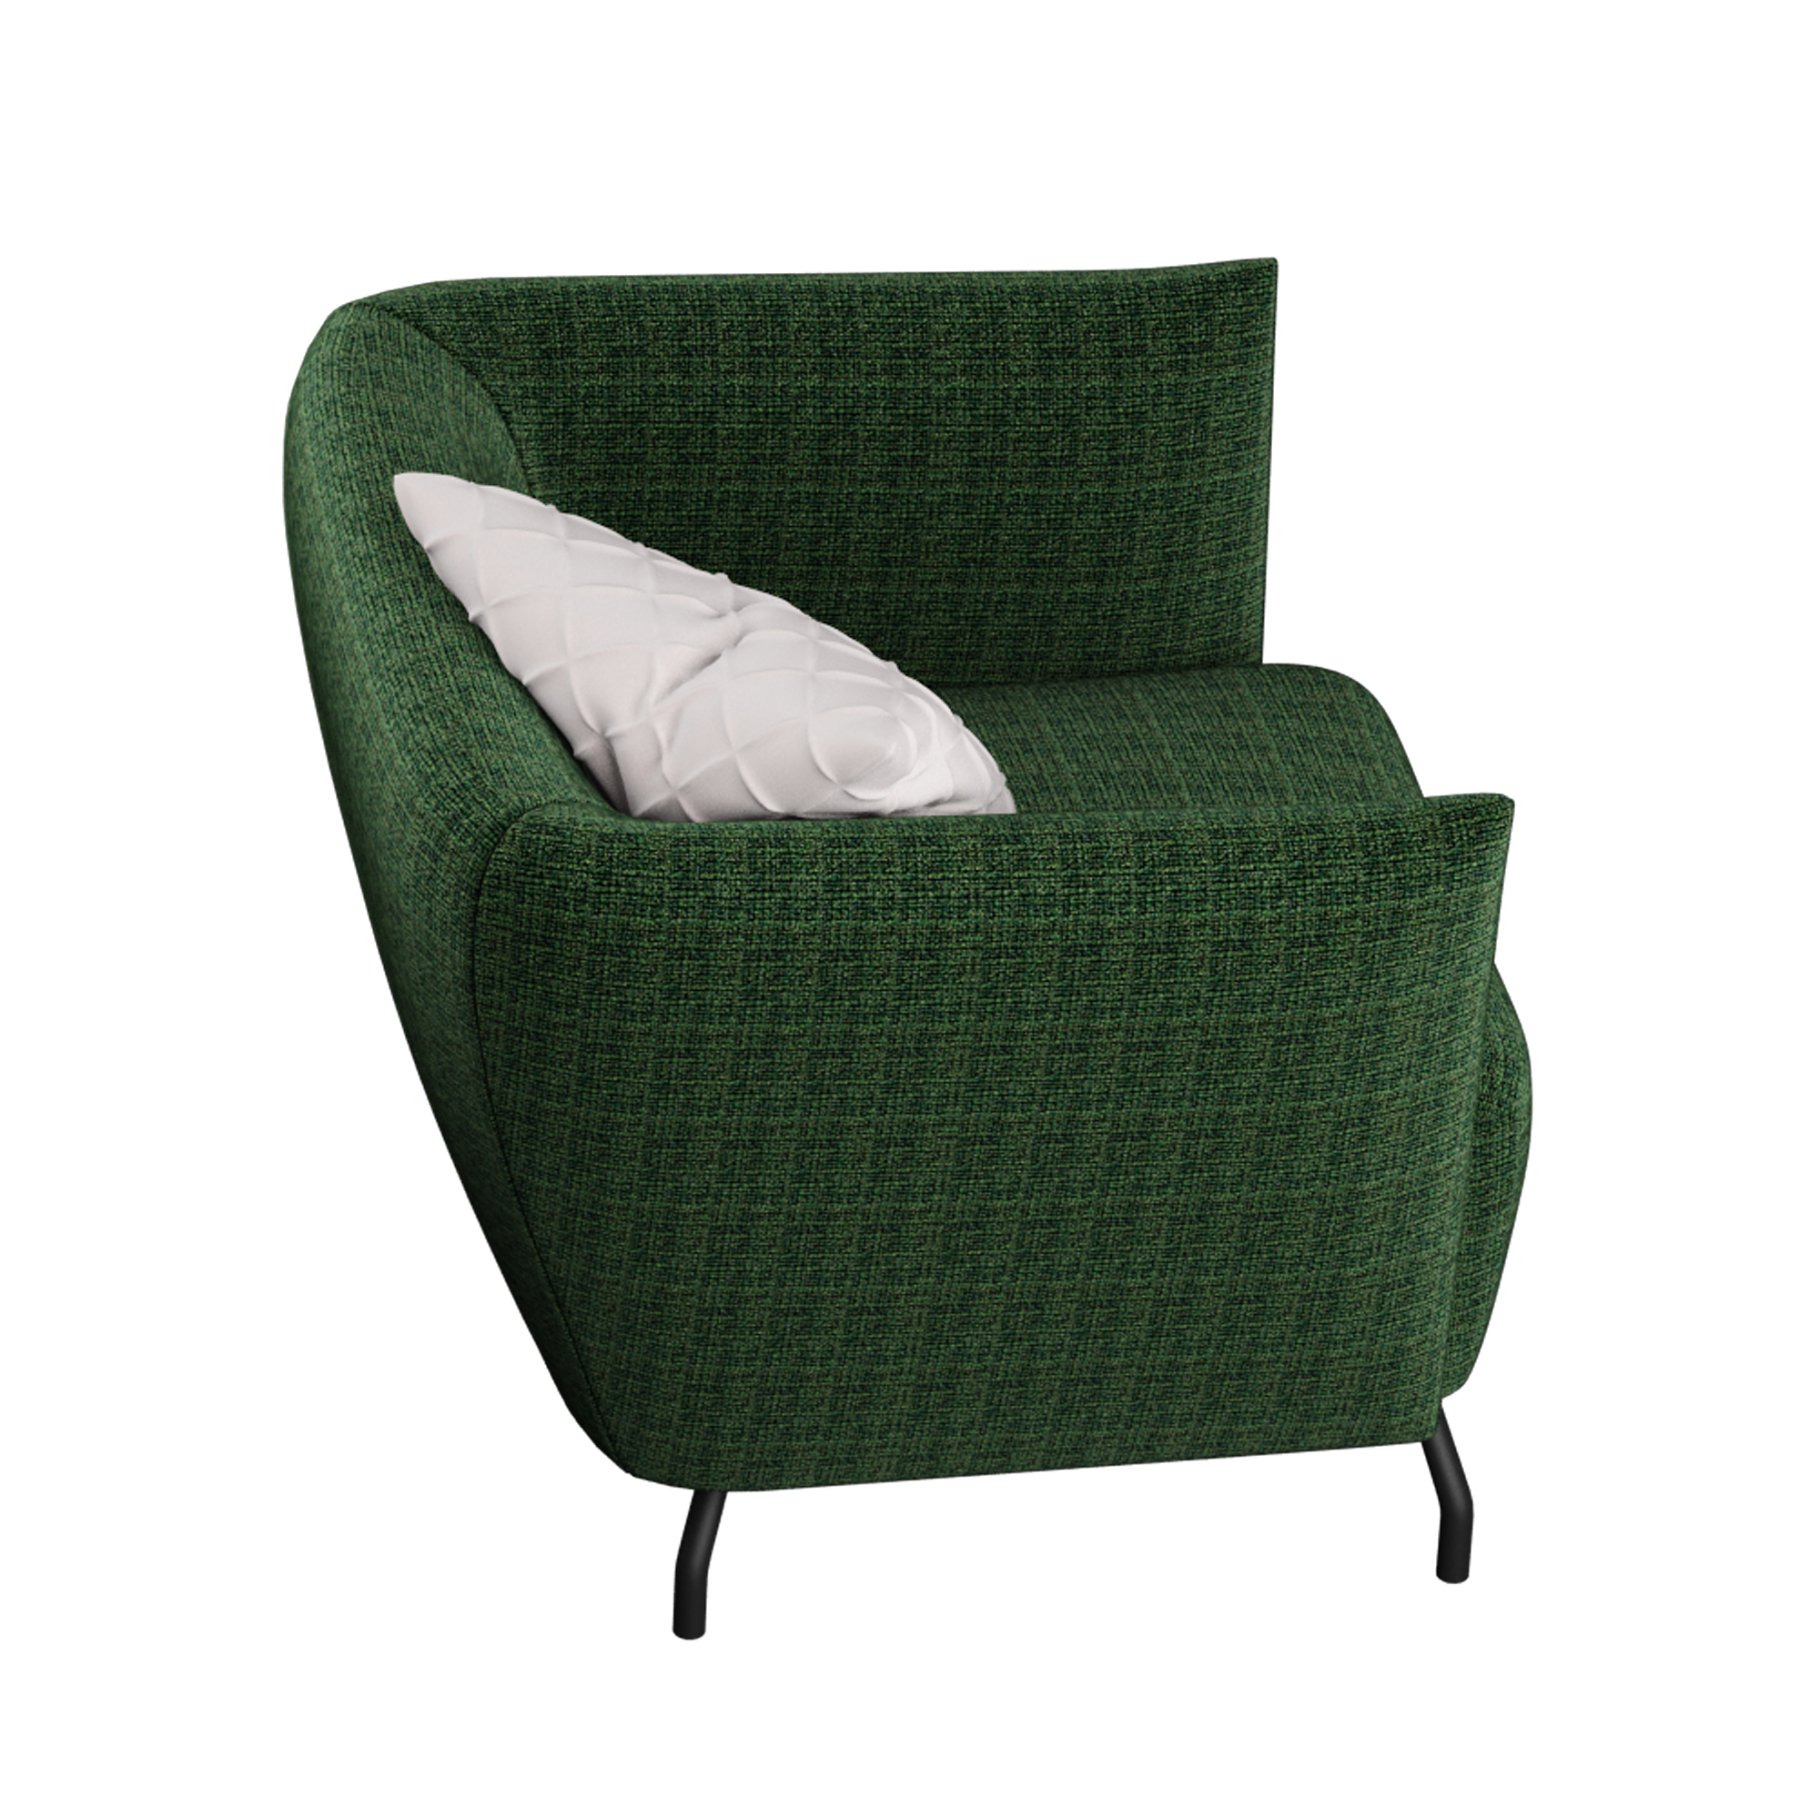 Rendering amazing 3d model of a green armchair side view